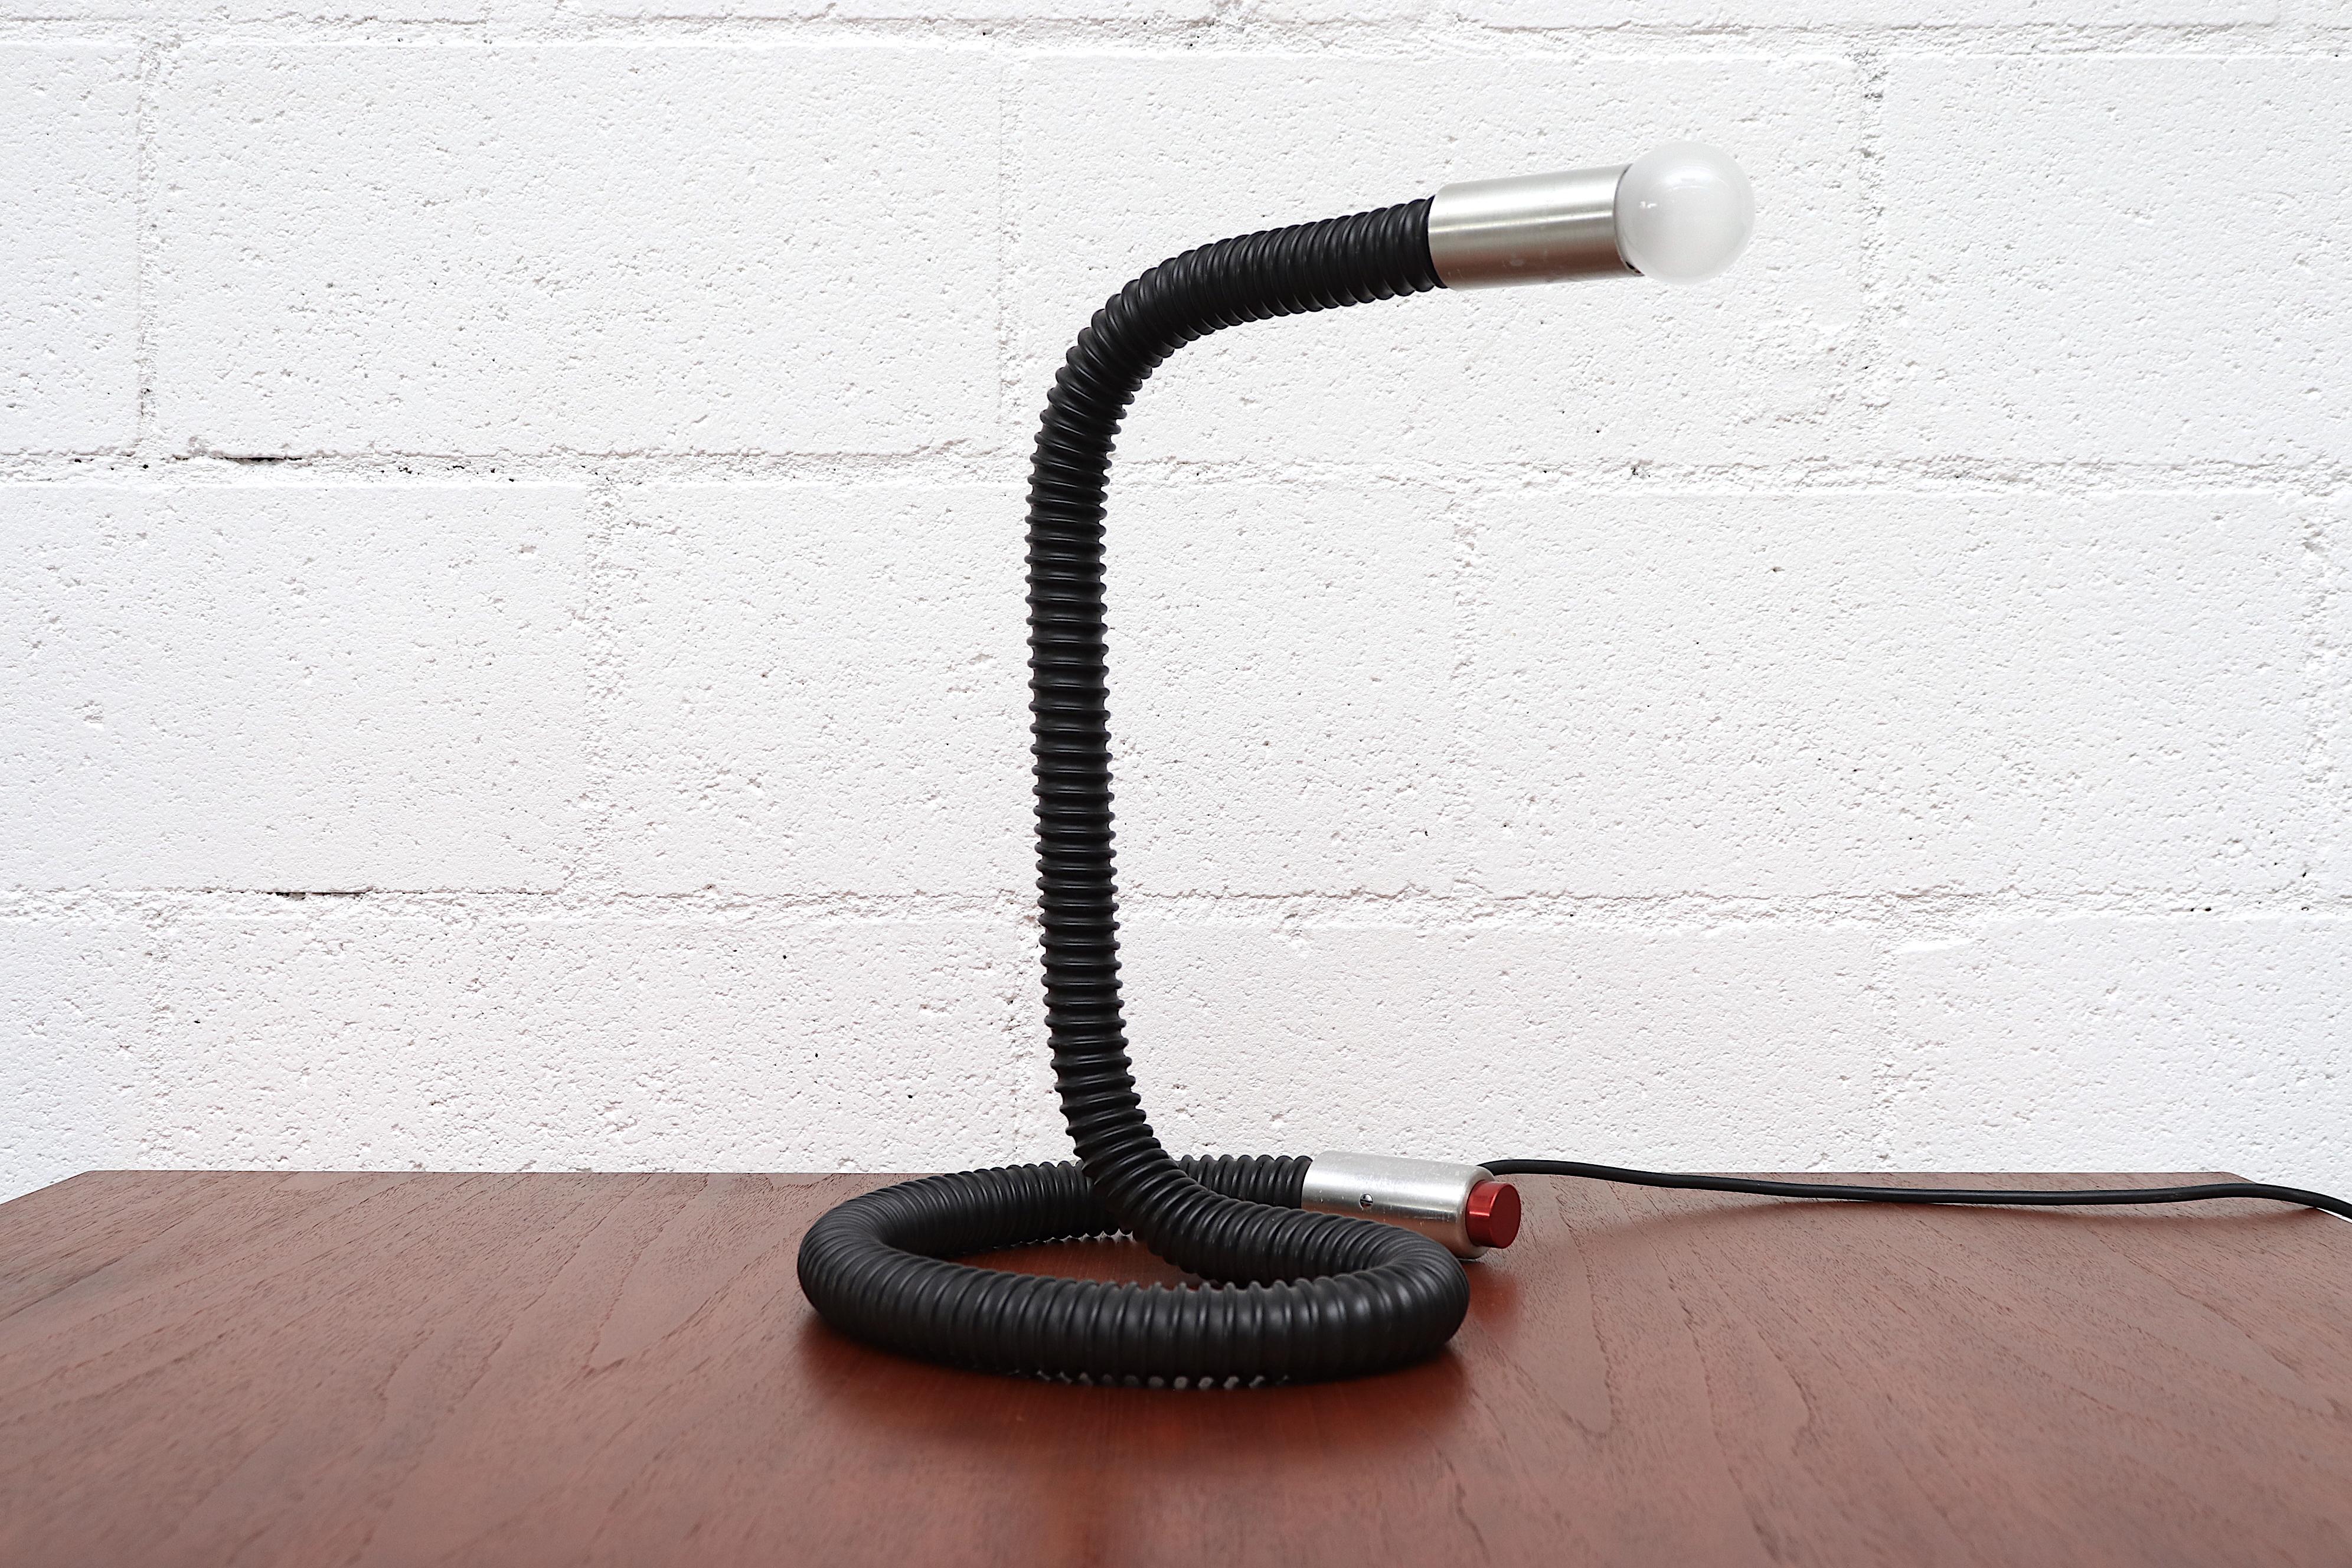 MOD RAAK Goose neck desk lamp with cobra-like non-flexible body and original European candelabra socket. Red push button light switch. In original condition with normal wear and original European plug.